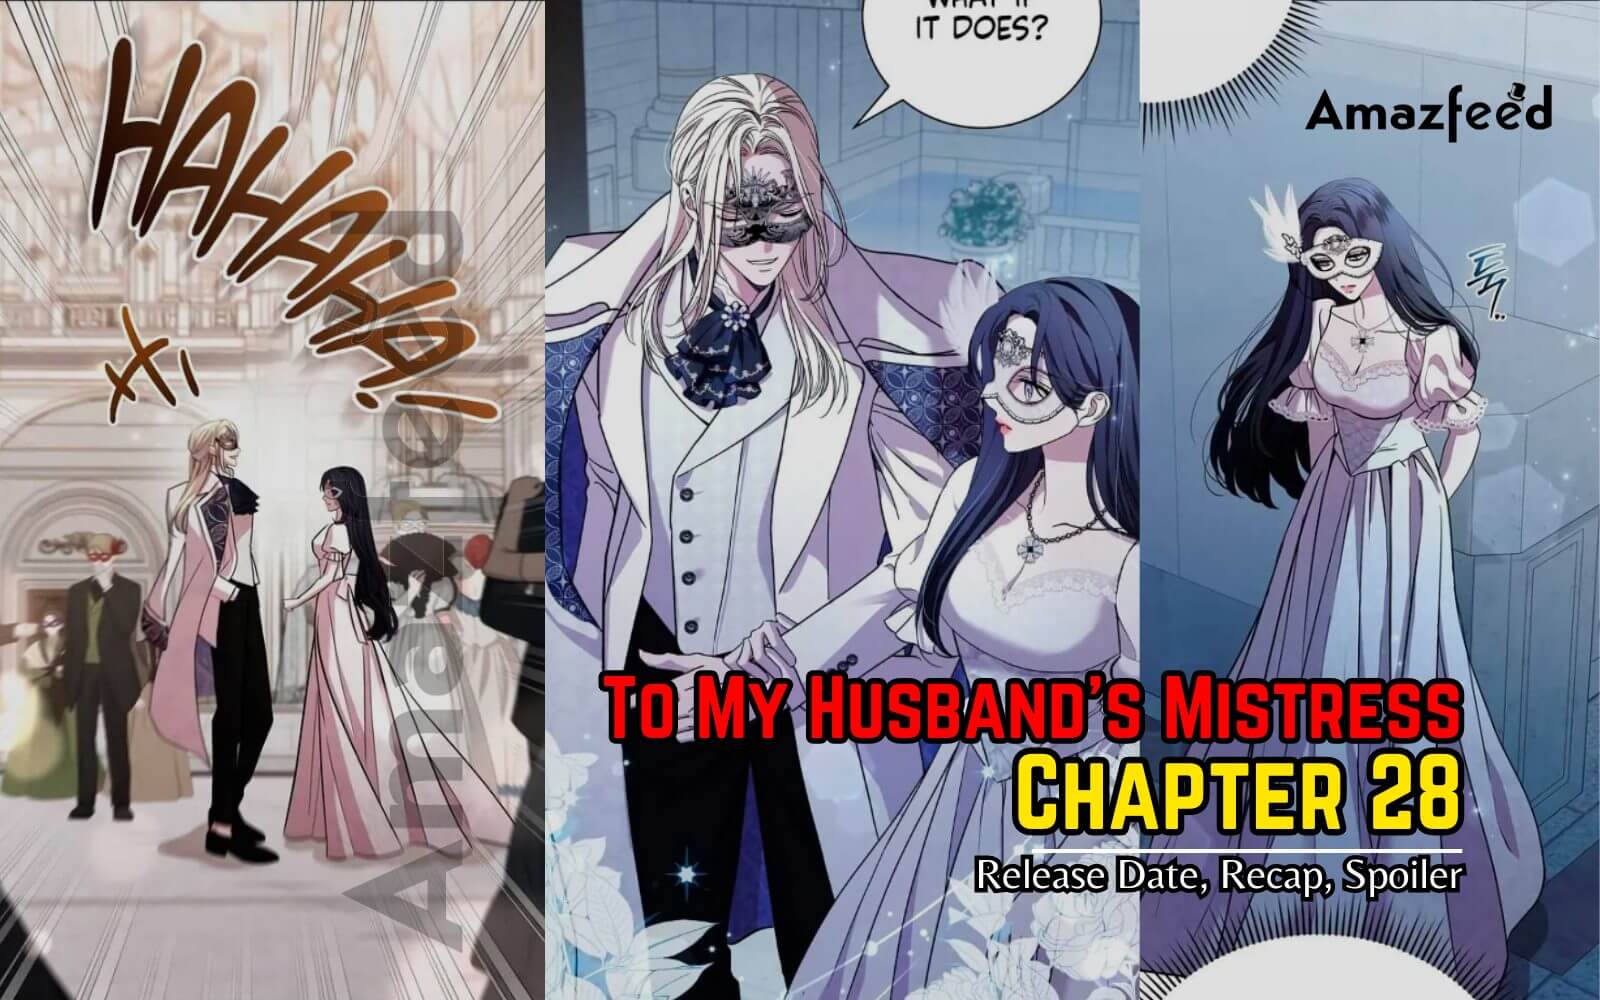 To My Husband’s Mistress Chapter 28